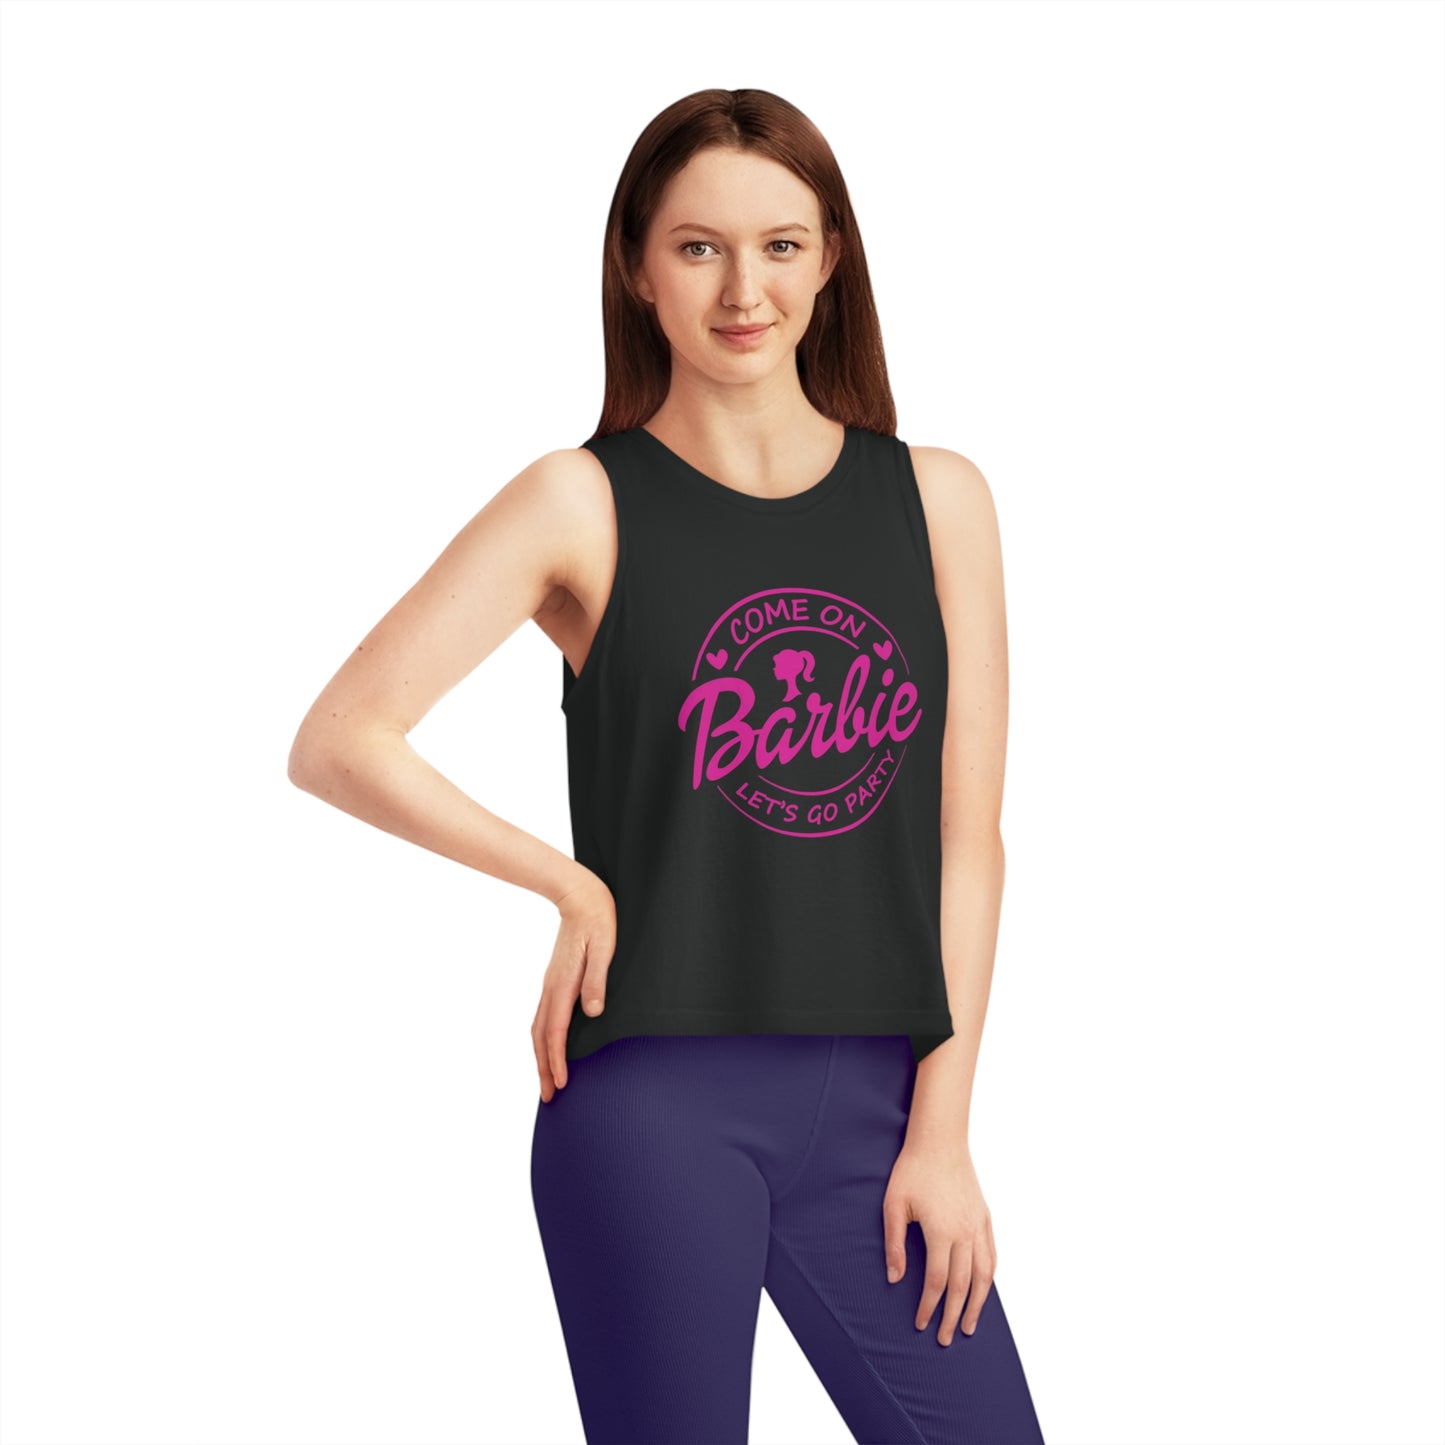 Barbie Movie Logo Cropped Tank Top, Come on Barbie Lets Go Party Tank Top Women's Dancer Cropped Tank Top